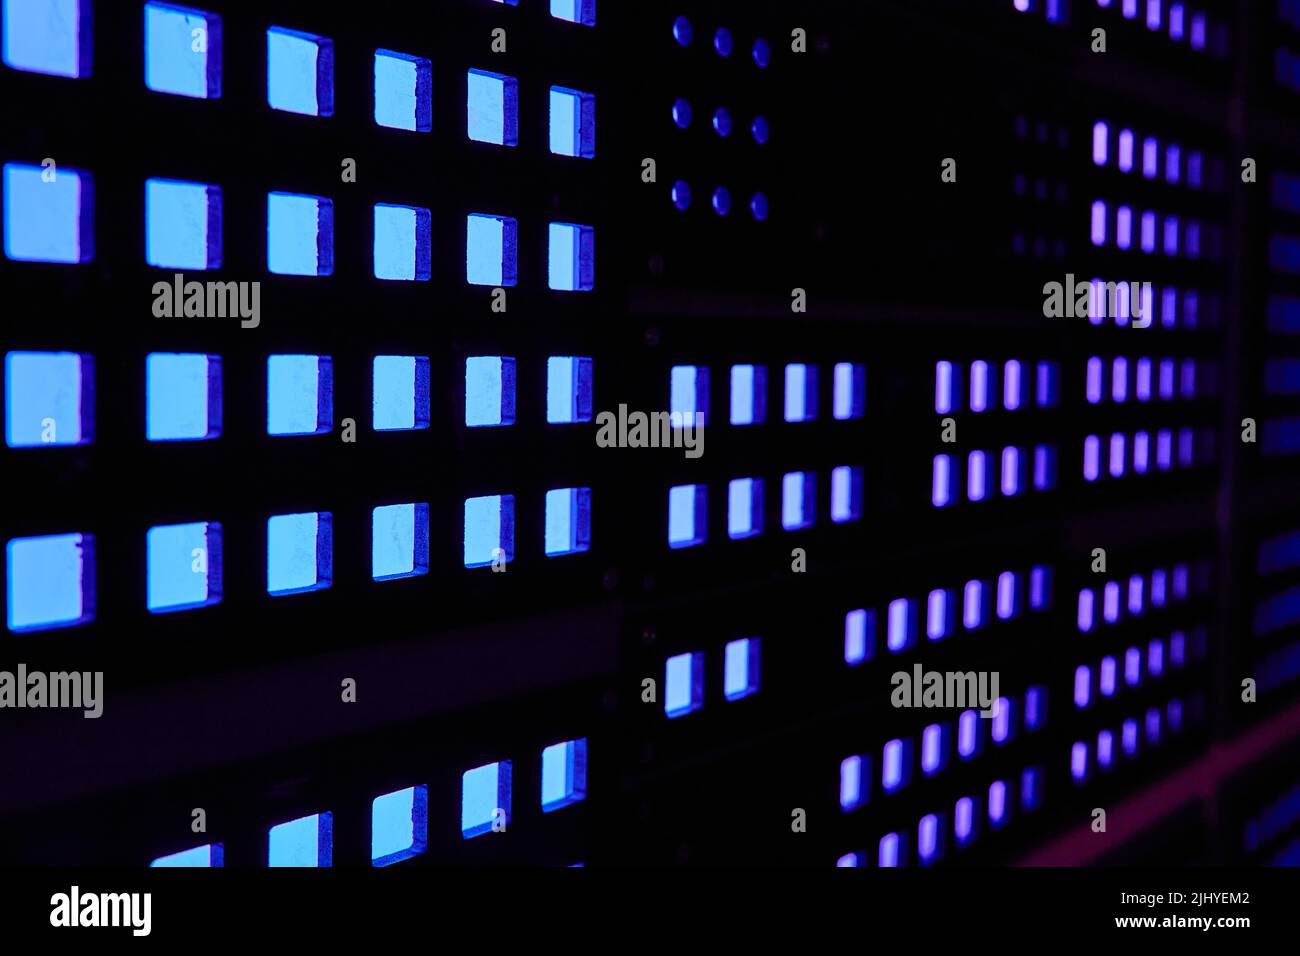 Computer wall board of blue and purple square lights Stock Photo